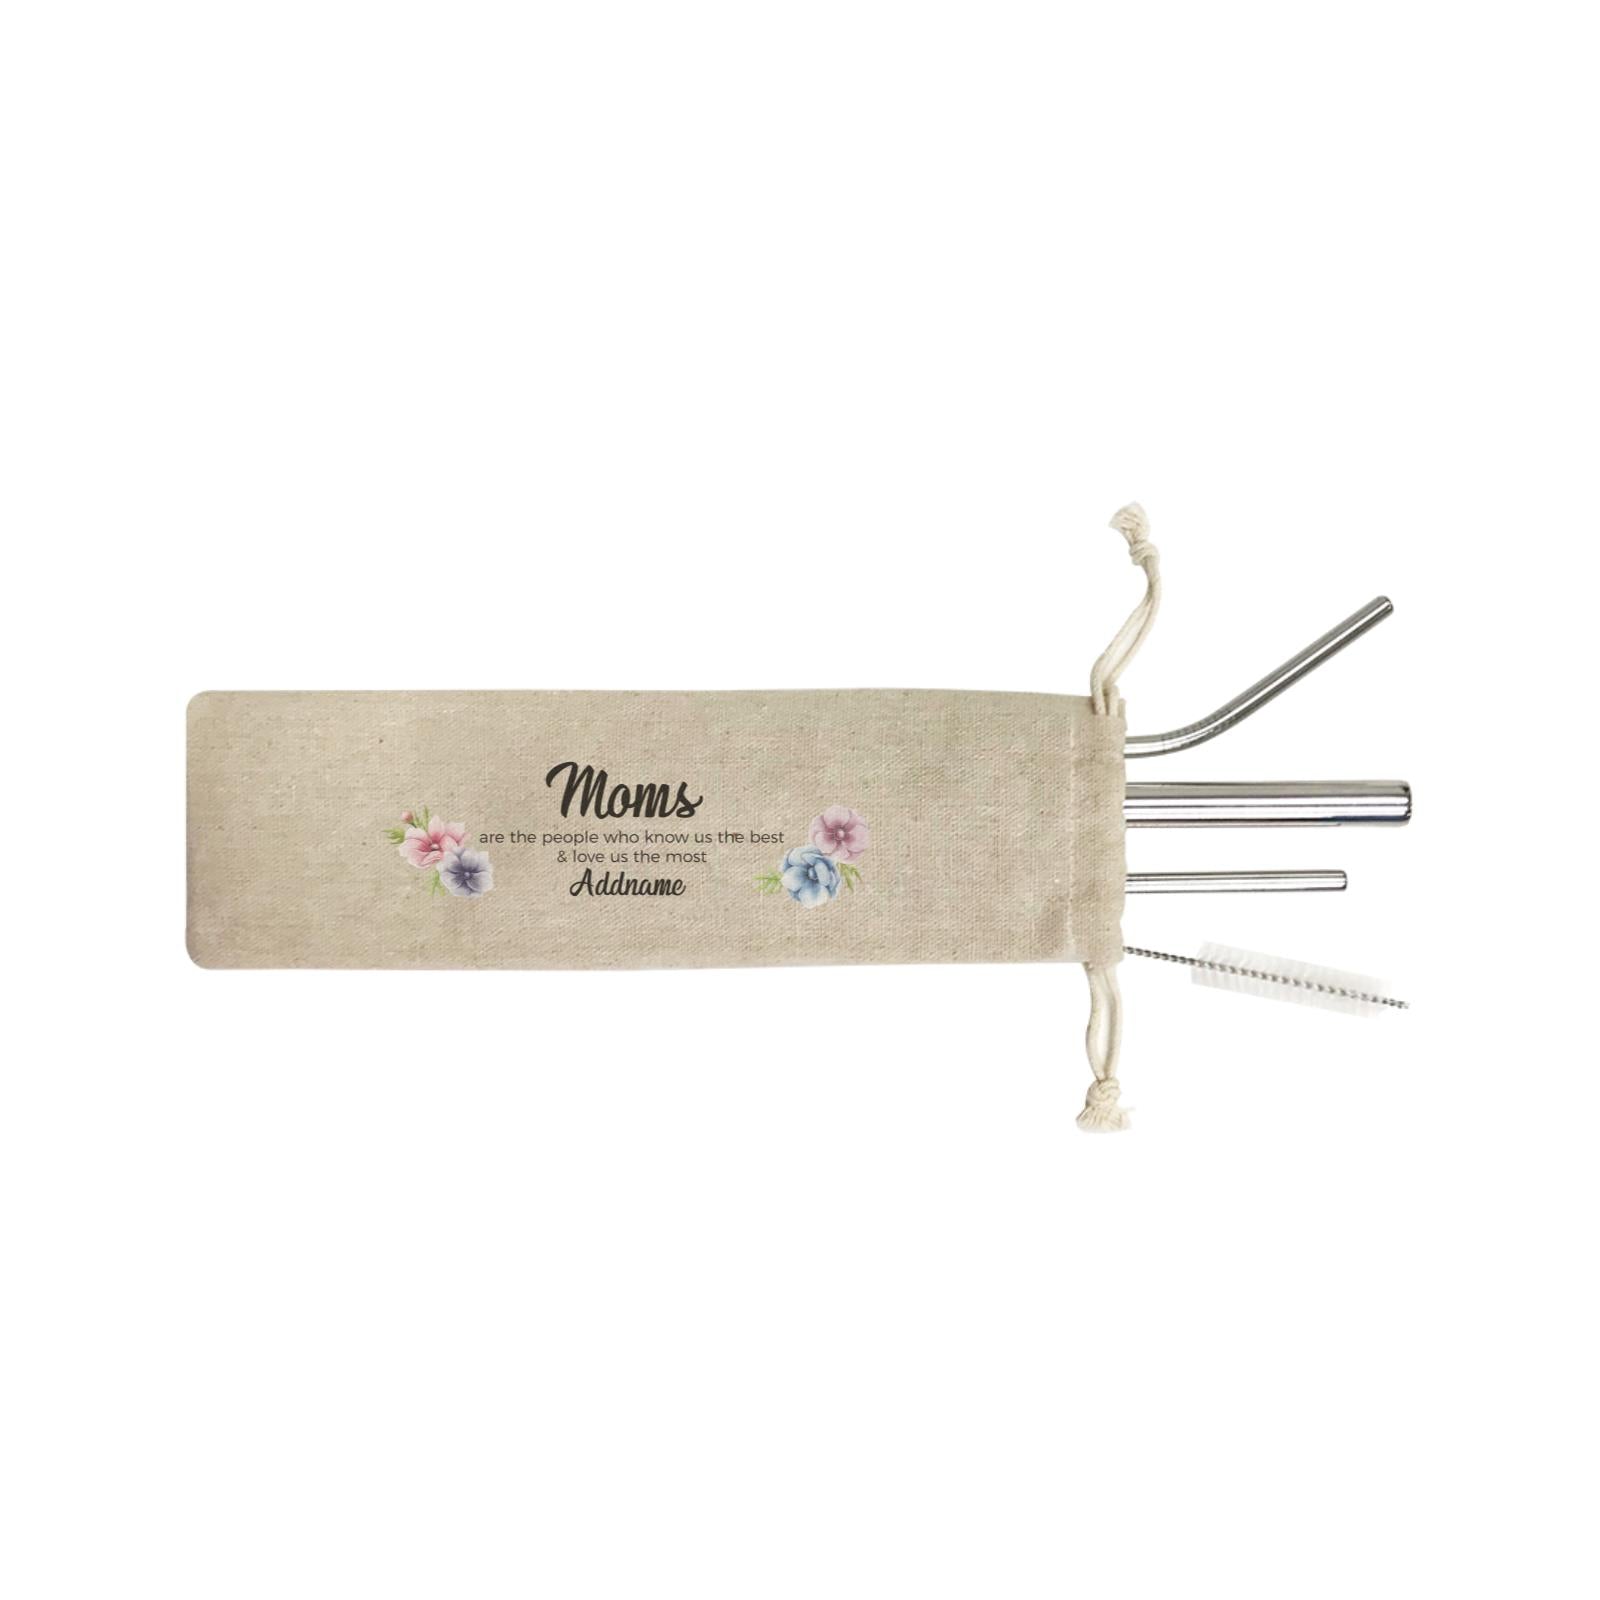 Sweet Mom Quotes 1 Moms Are The People Who Know Us The Best & Love Us The Most Addname SB 4-In-1 Stainless Steel Straw Set in Satchel